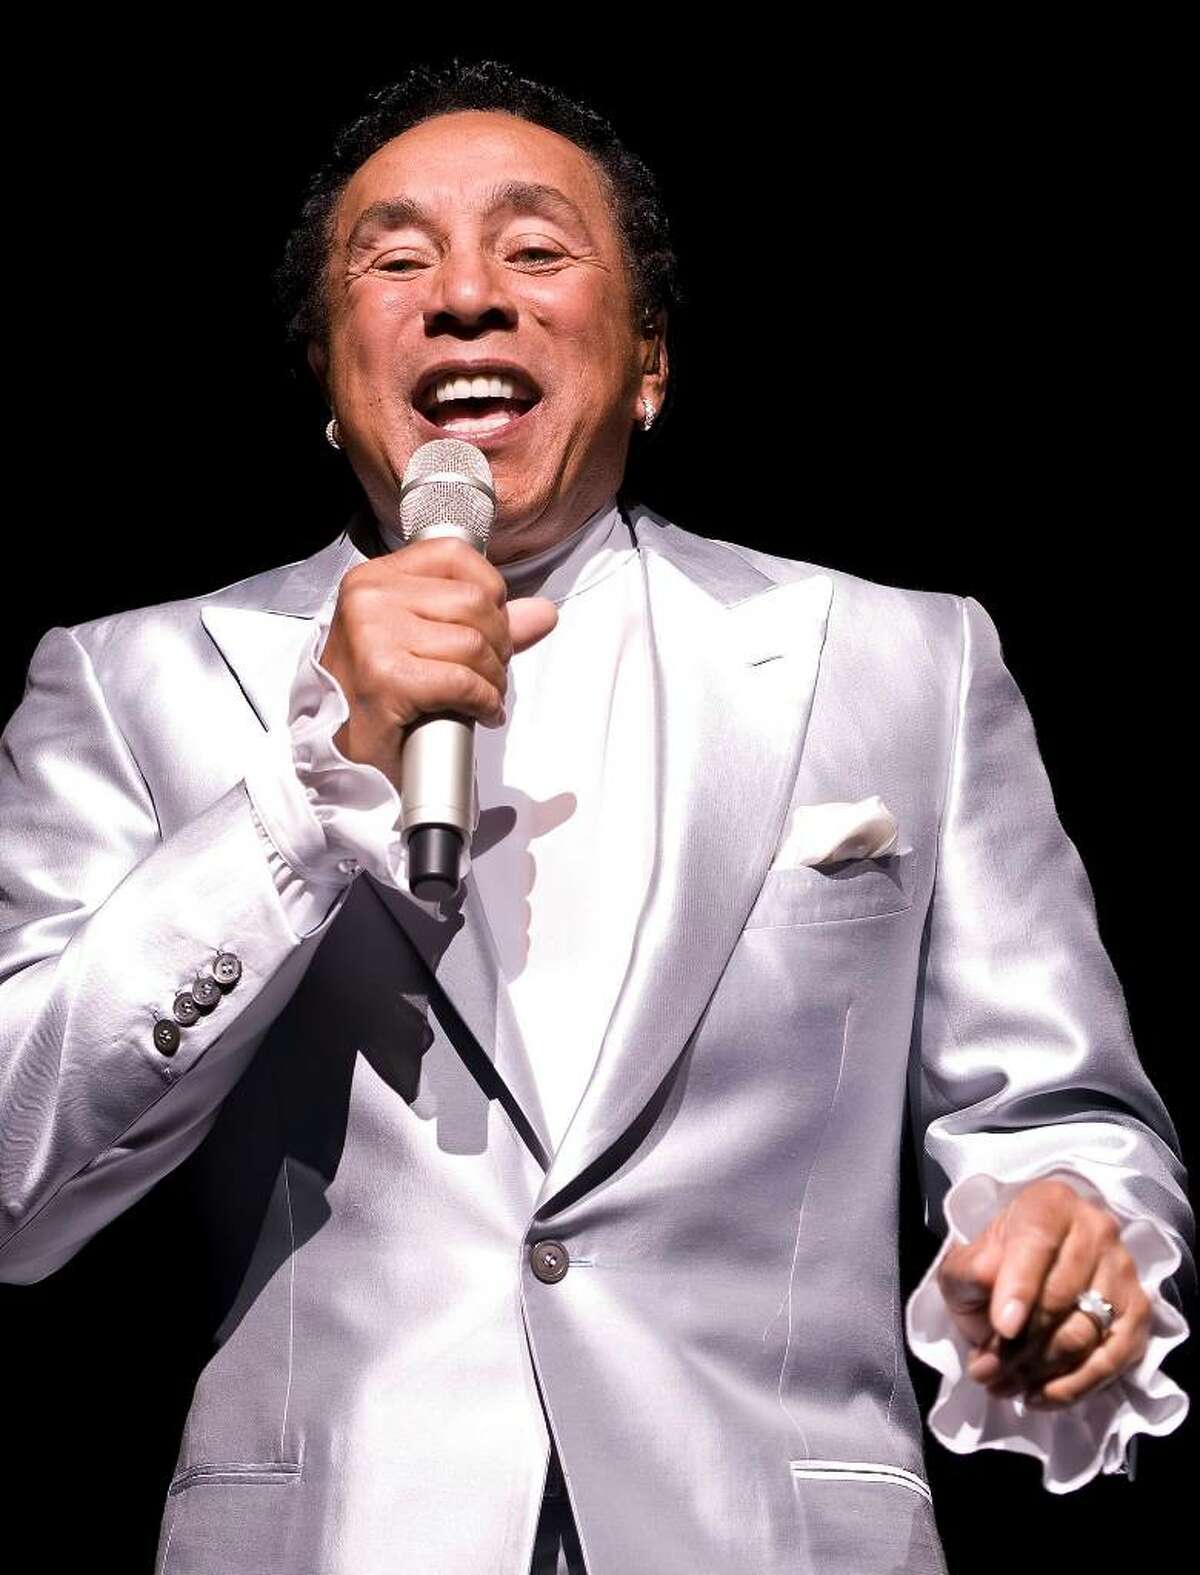 Hundreds attend the Dana's Angels Research Trust benefit, with headliner Smokey Robinson, at the Palace Theatre in Stamford, Friday May 14, 2010. Proceeds will benefit research for Neimann-Pick Type C disease. Smokey Robinson performs for the crowd.